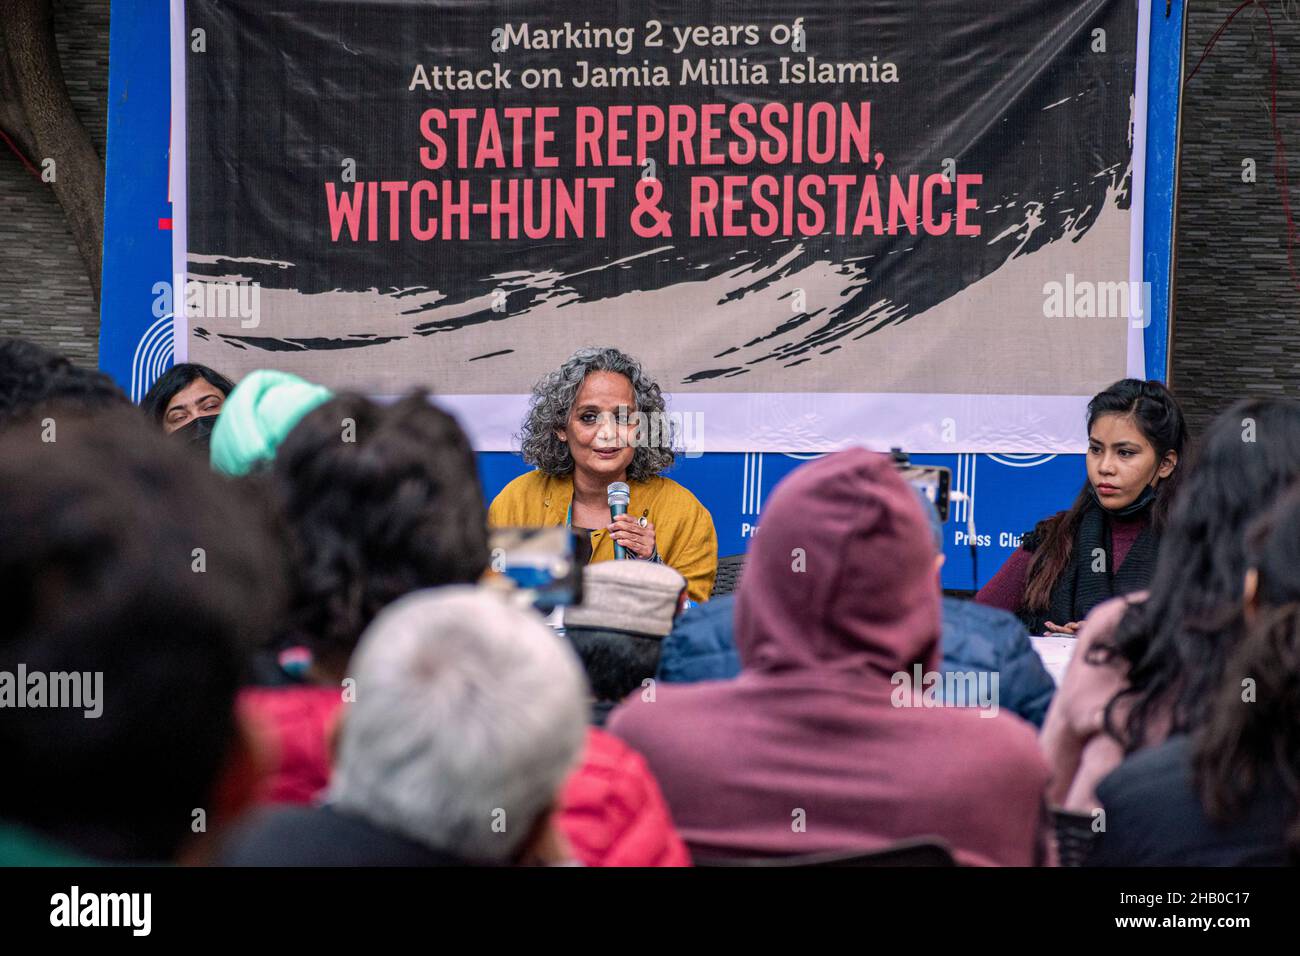 New Delhi, Delhi, India. 15th Dec, 2021. Arundhati Roy during the event marking 2 years of Attack on Jamia Millia Islamia, Central University on 15th December 2019.On 15th December 2019 the Delhi Police and the RAF officials entered the University without permission of the administration. The police and RAF officials made disproportionate use of force against students. Amongst other weaponries, pellets, rubber bullets and even live ammunition was discharged against young, protesting students. Tear gas shells and sound bombs were used indiscriminately, including in confined spaces. Police a Stock Photo